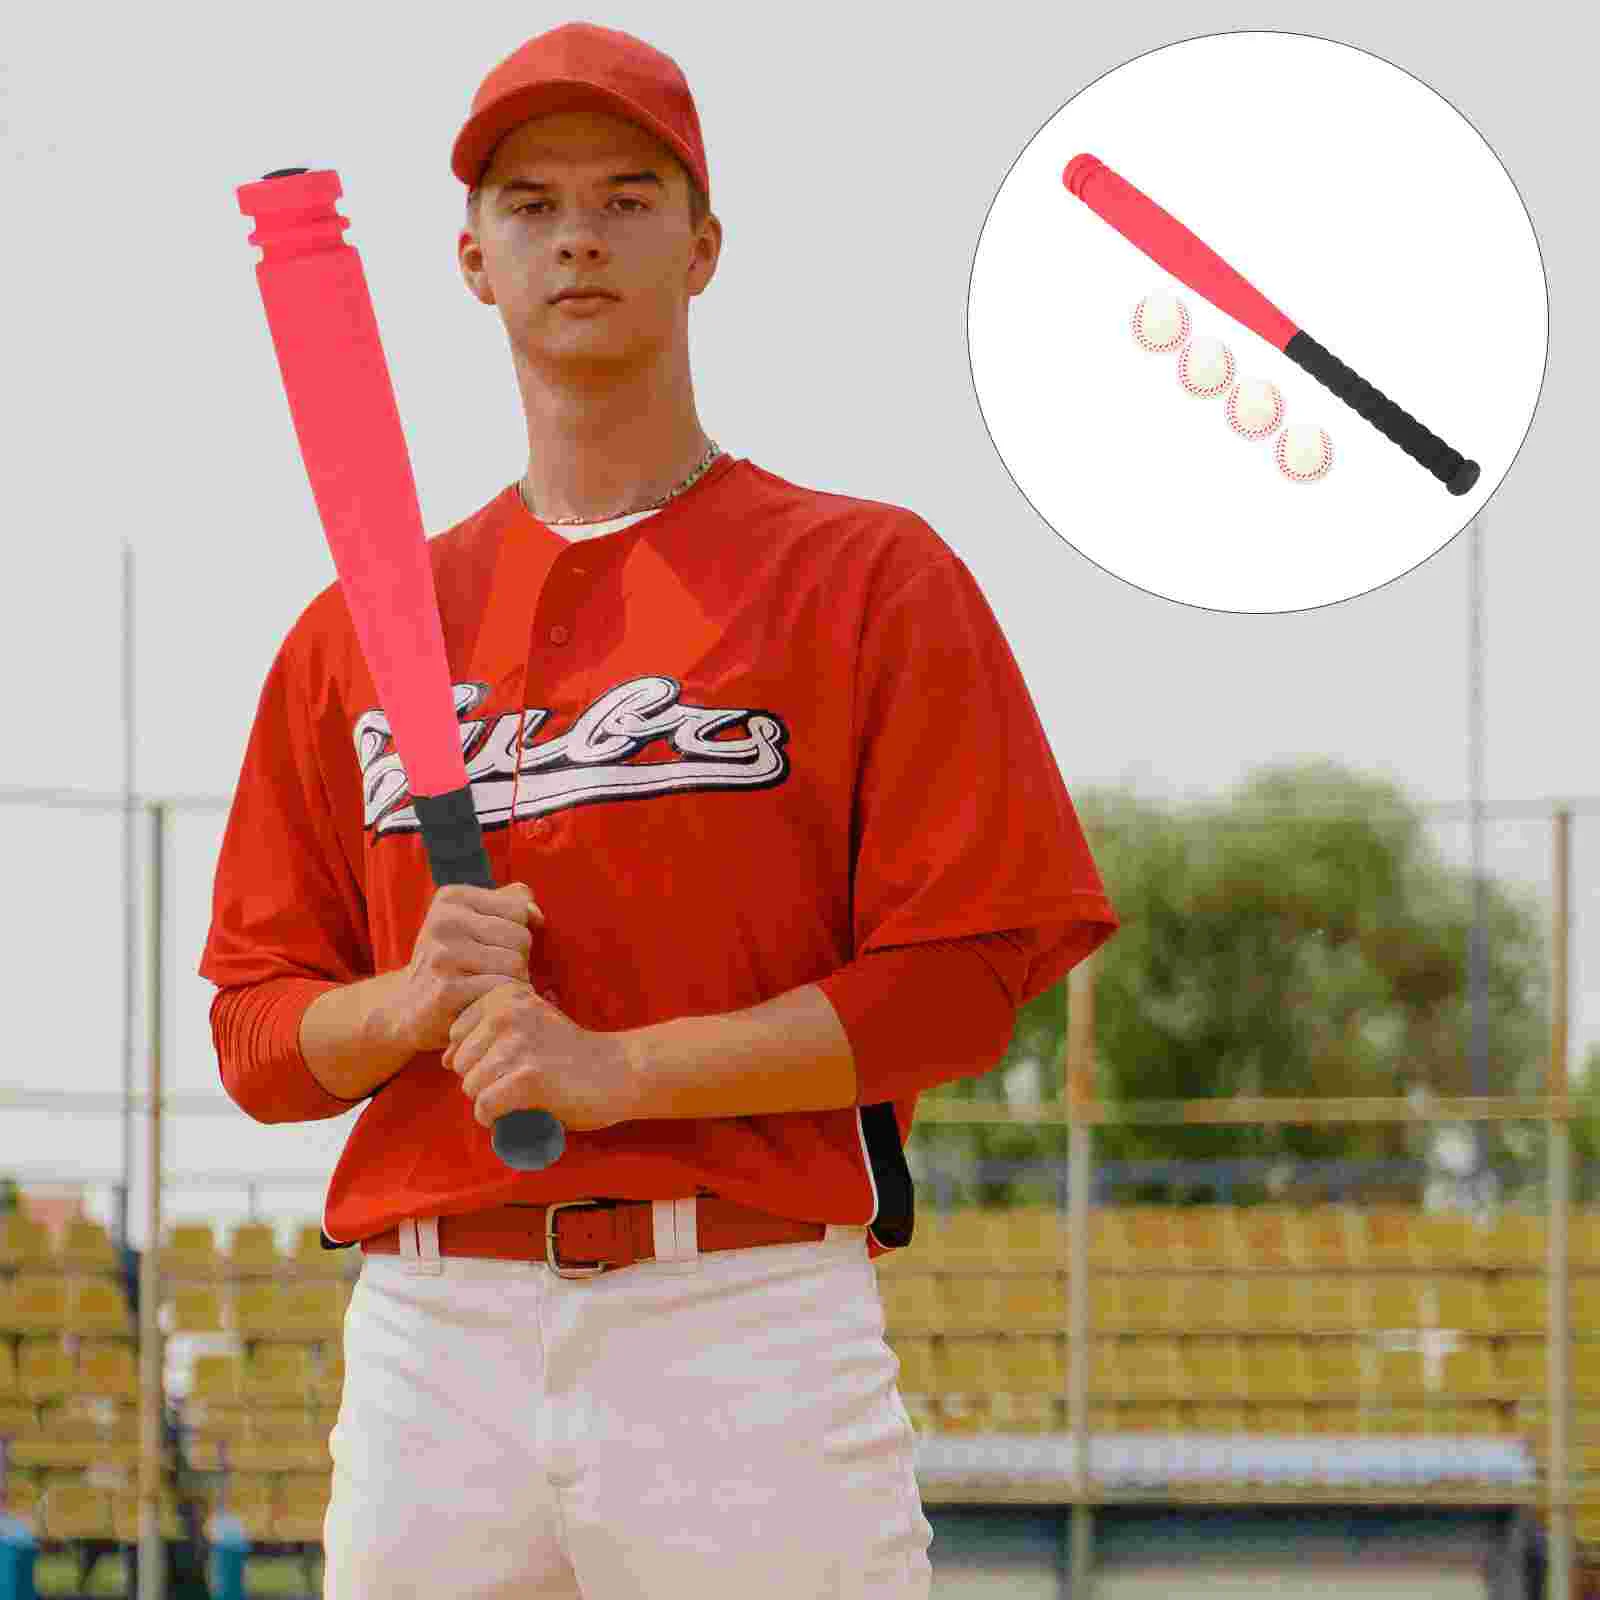 

Baseball Suit Outdoor Playset Kids Bat Toy Wear-resistant Children Plastic Interesting Toys for Age 2-4 Training Toddler